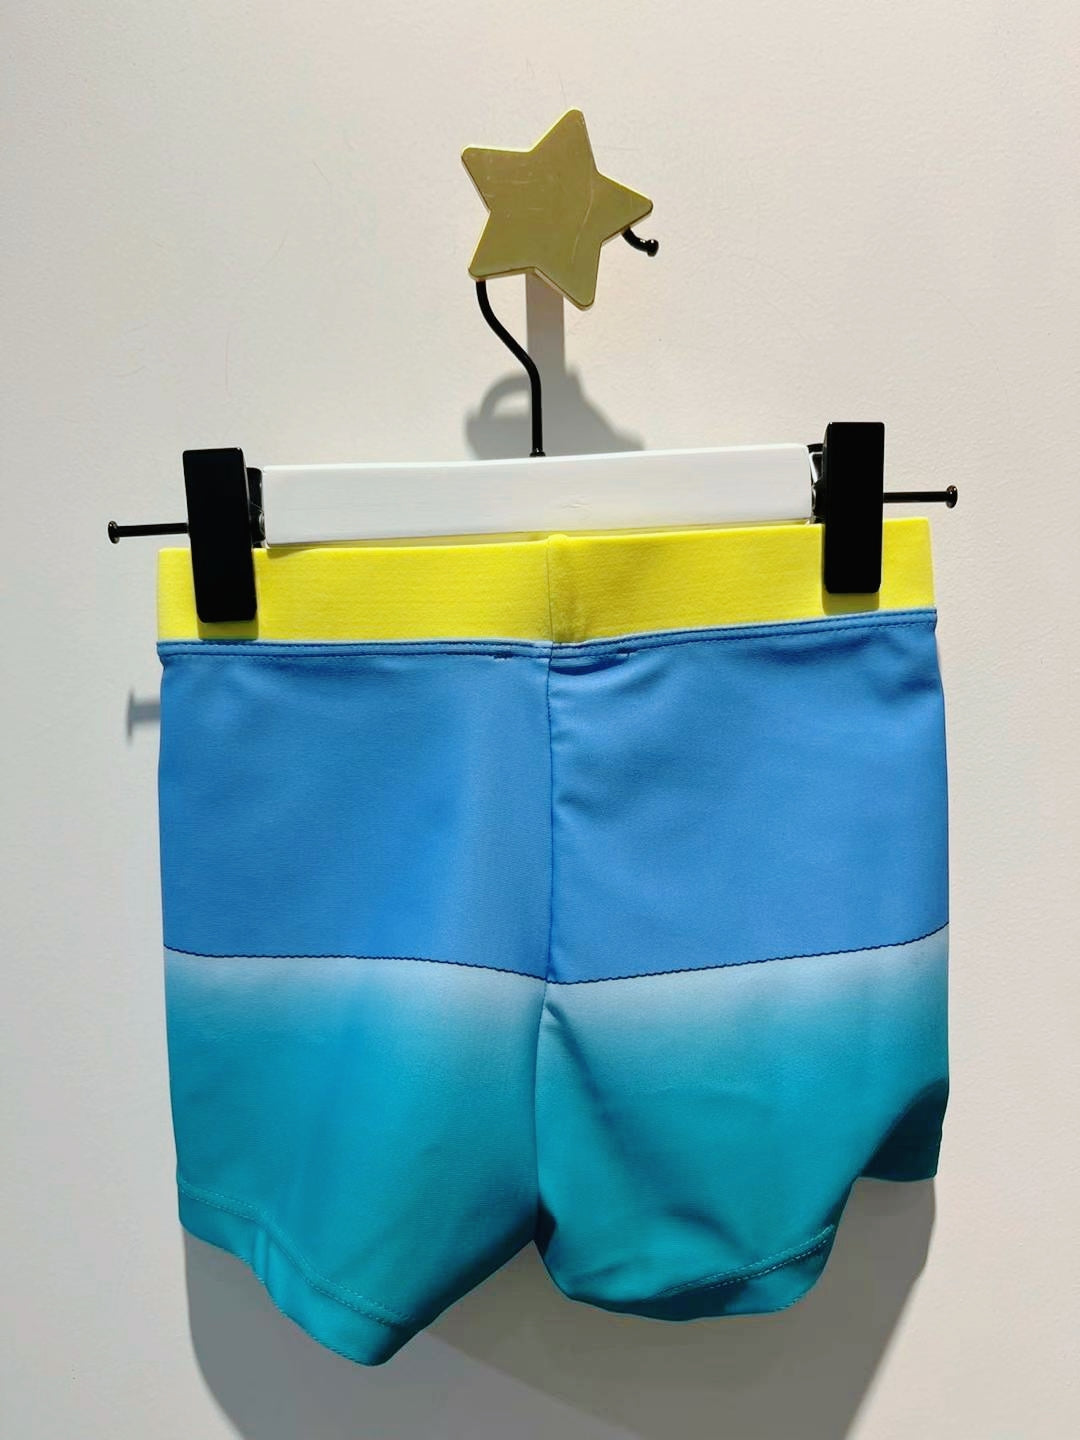 The Marc Jacobs Boy Swimming Trunks